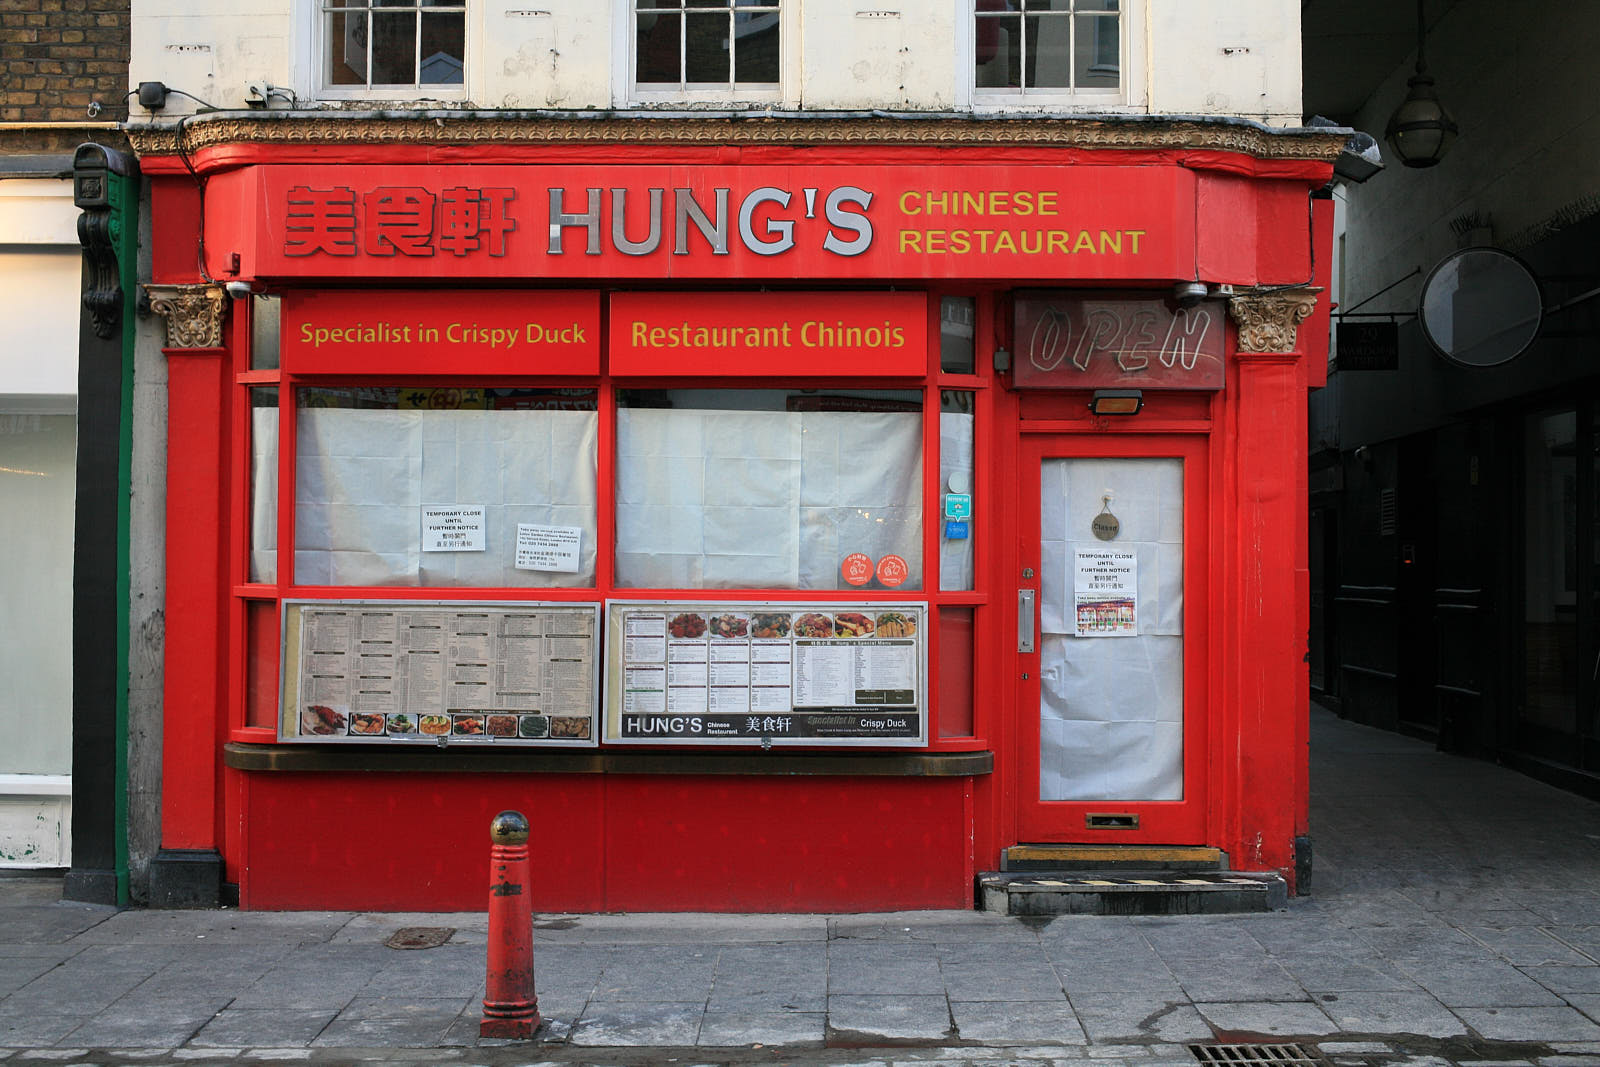 Roast meats restaurant, Hung’s permanently closed last year during the coronavirus pandemic, which during lockdowns has affected London’s Chinatown restaurants